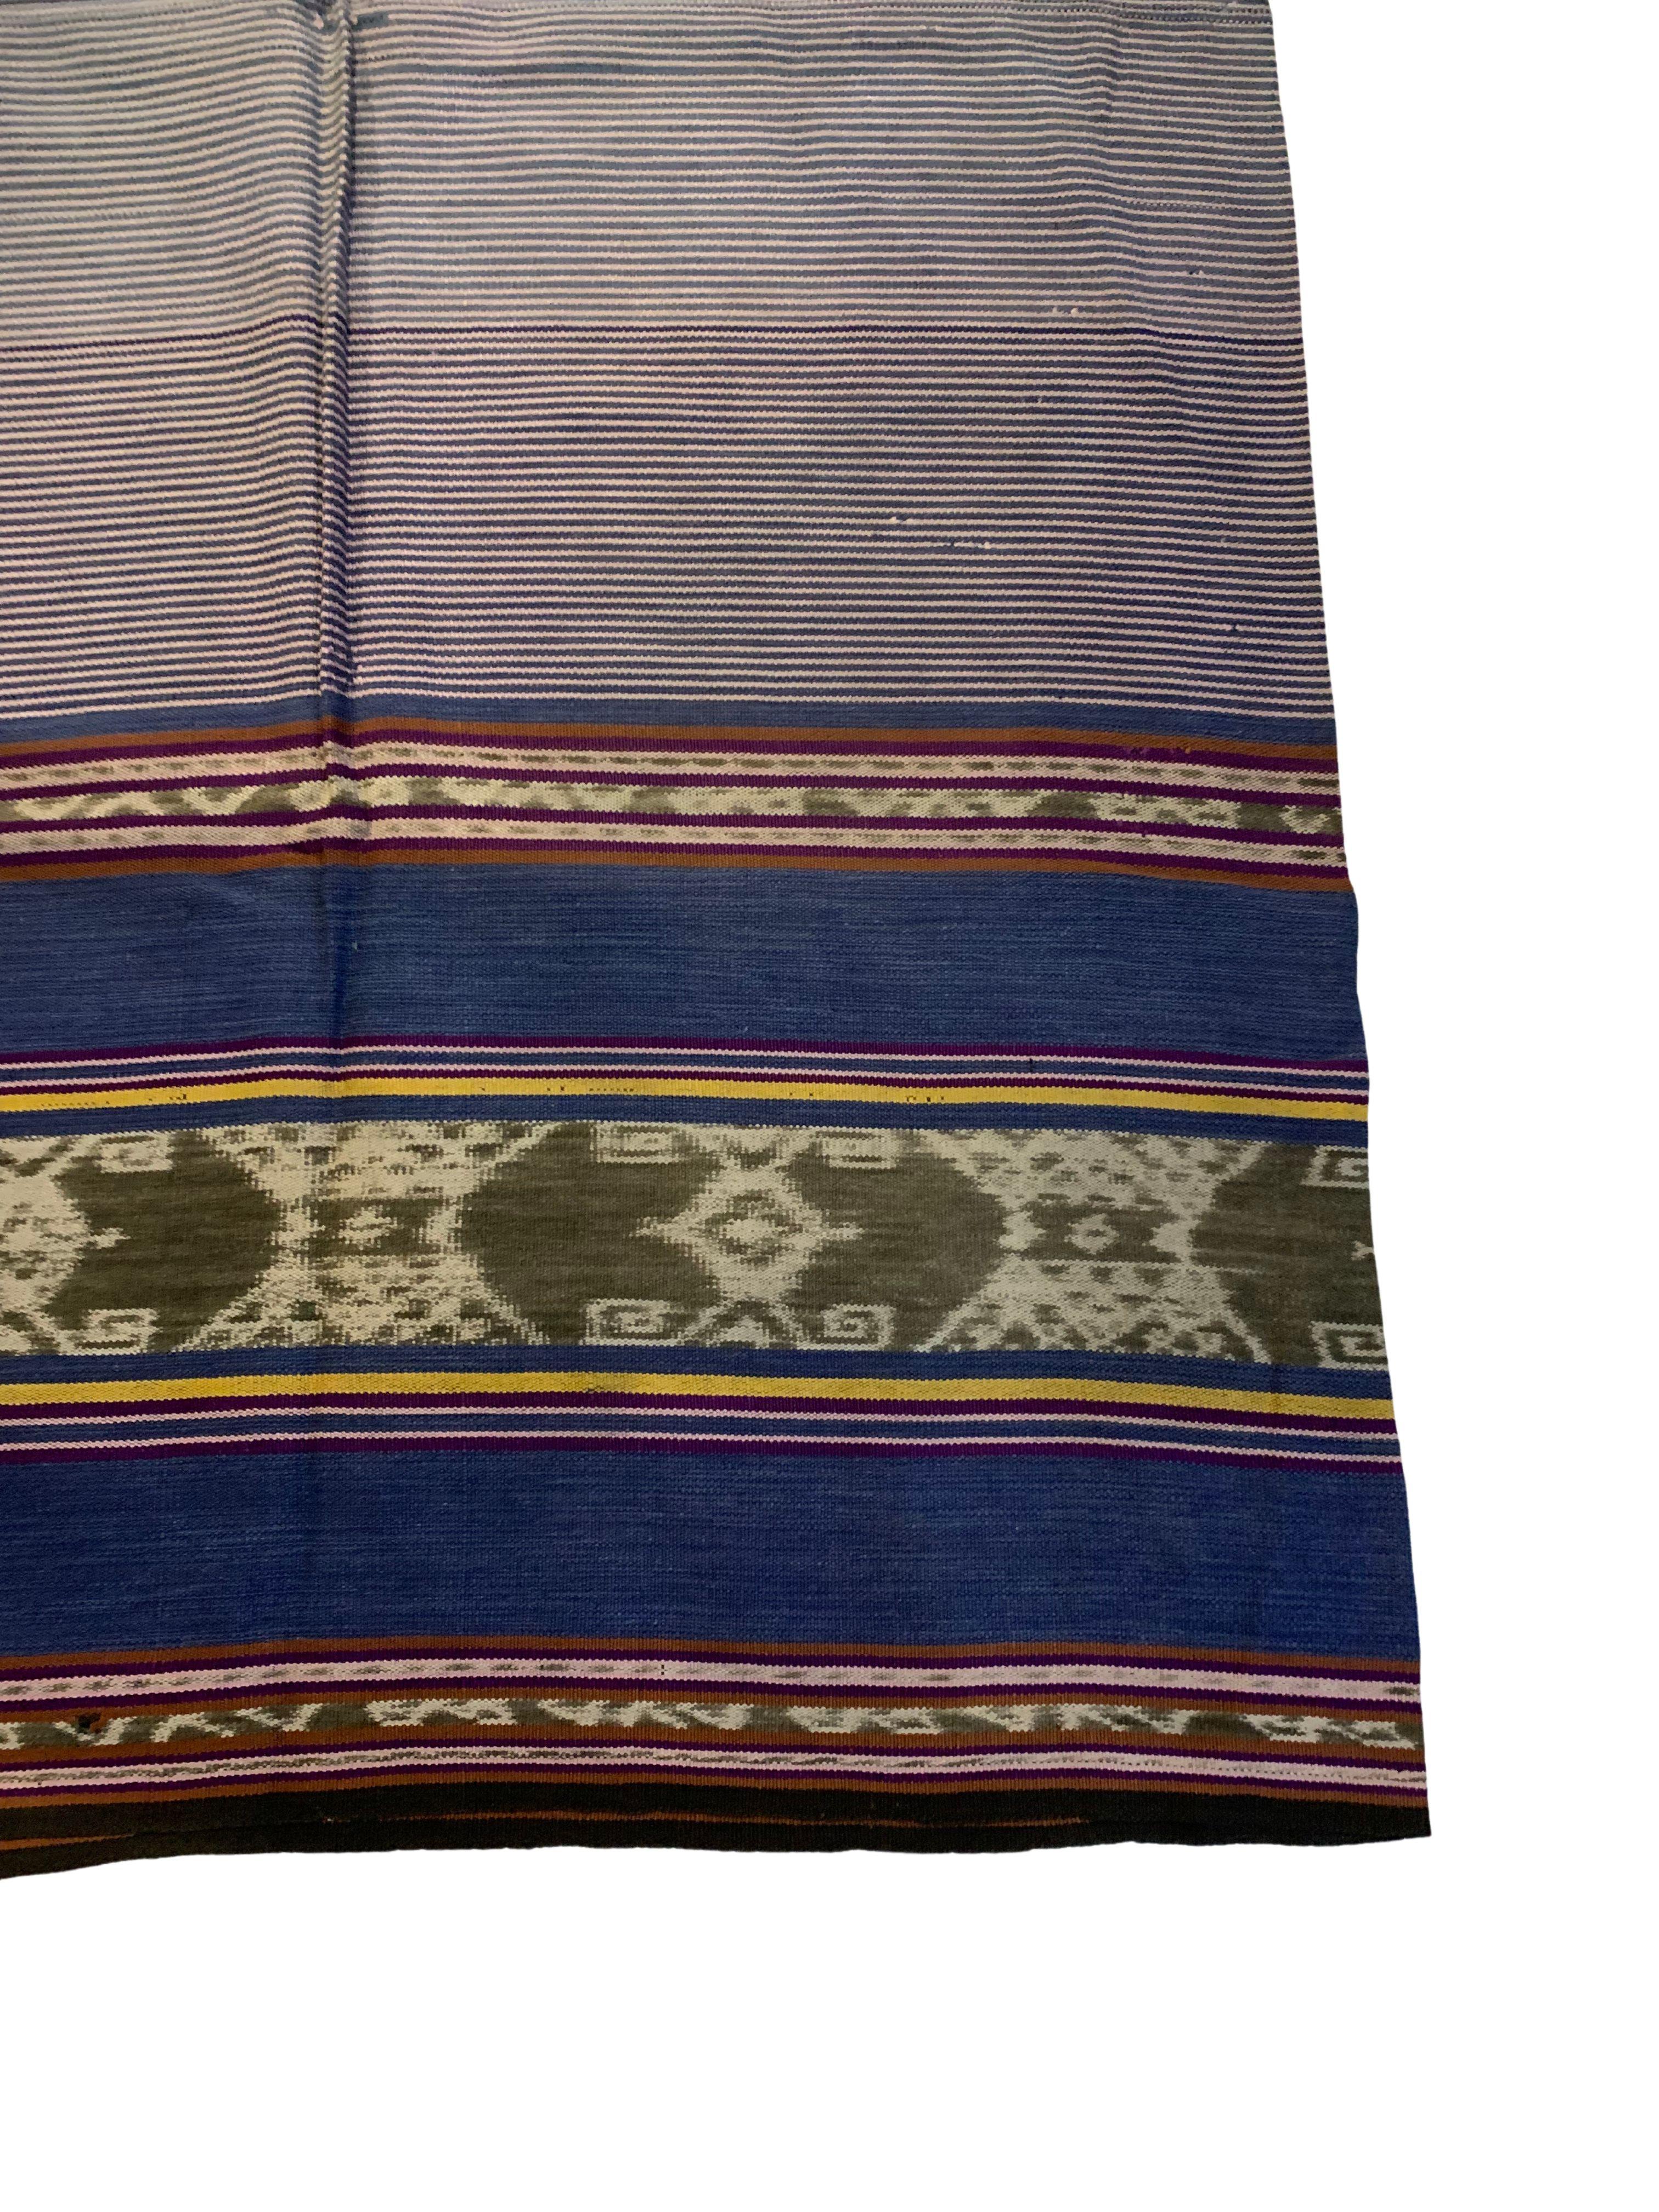 Other Ikat Textile from Timor Island with Stunning Naturally Coloured Dye, Indonesia For Sale